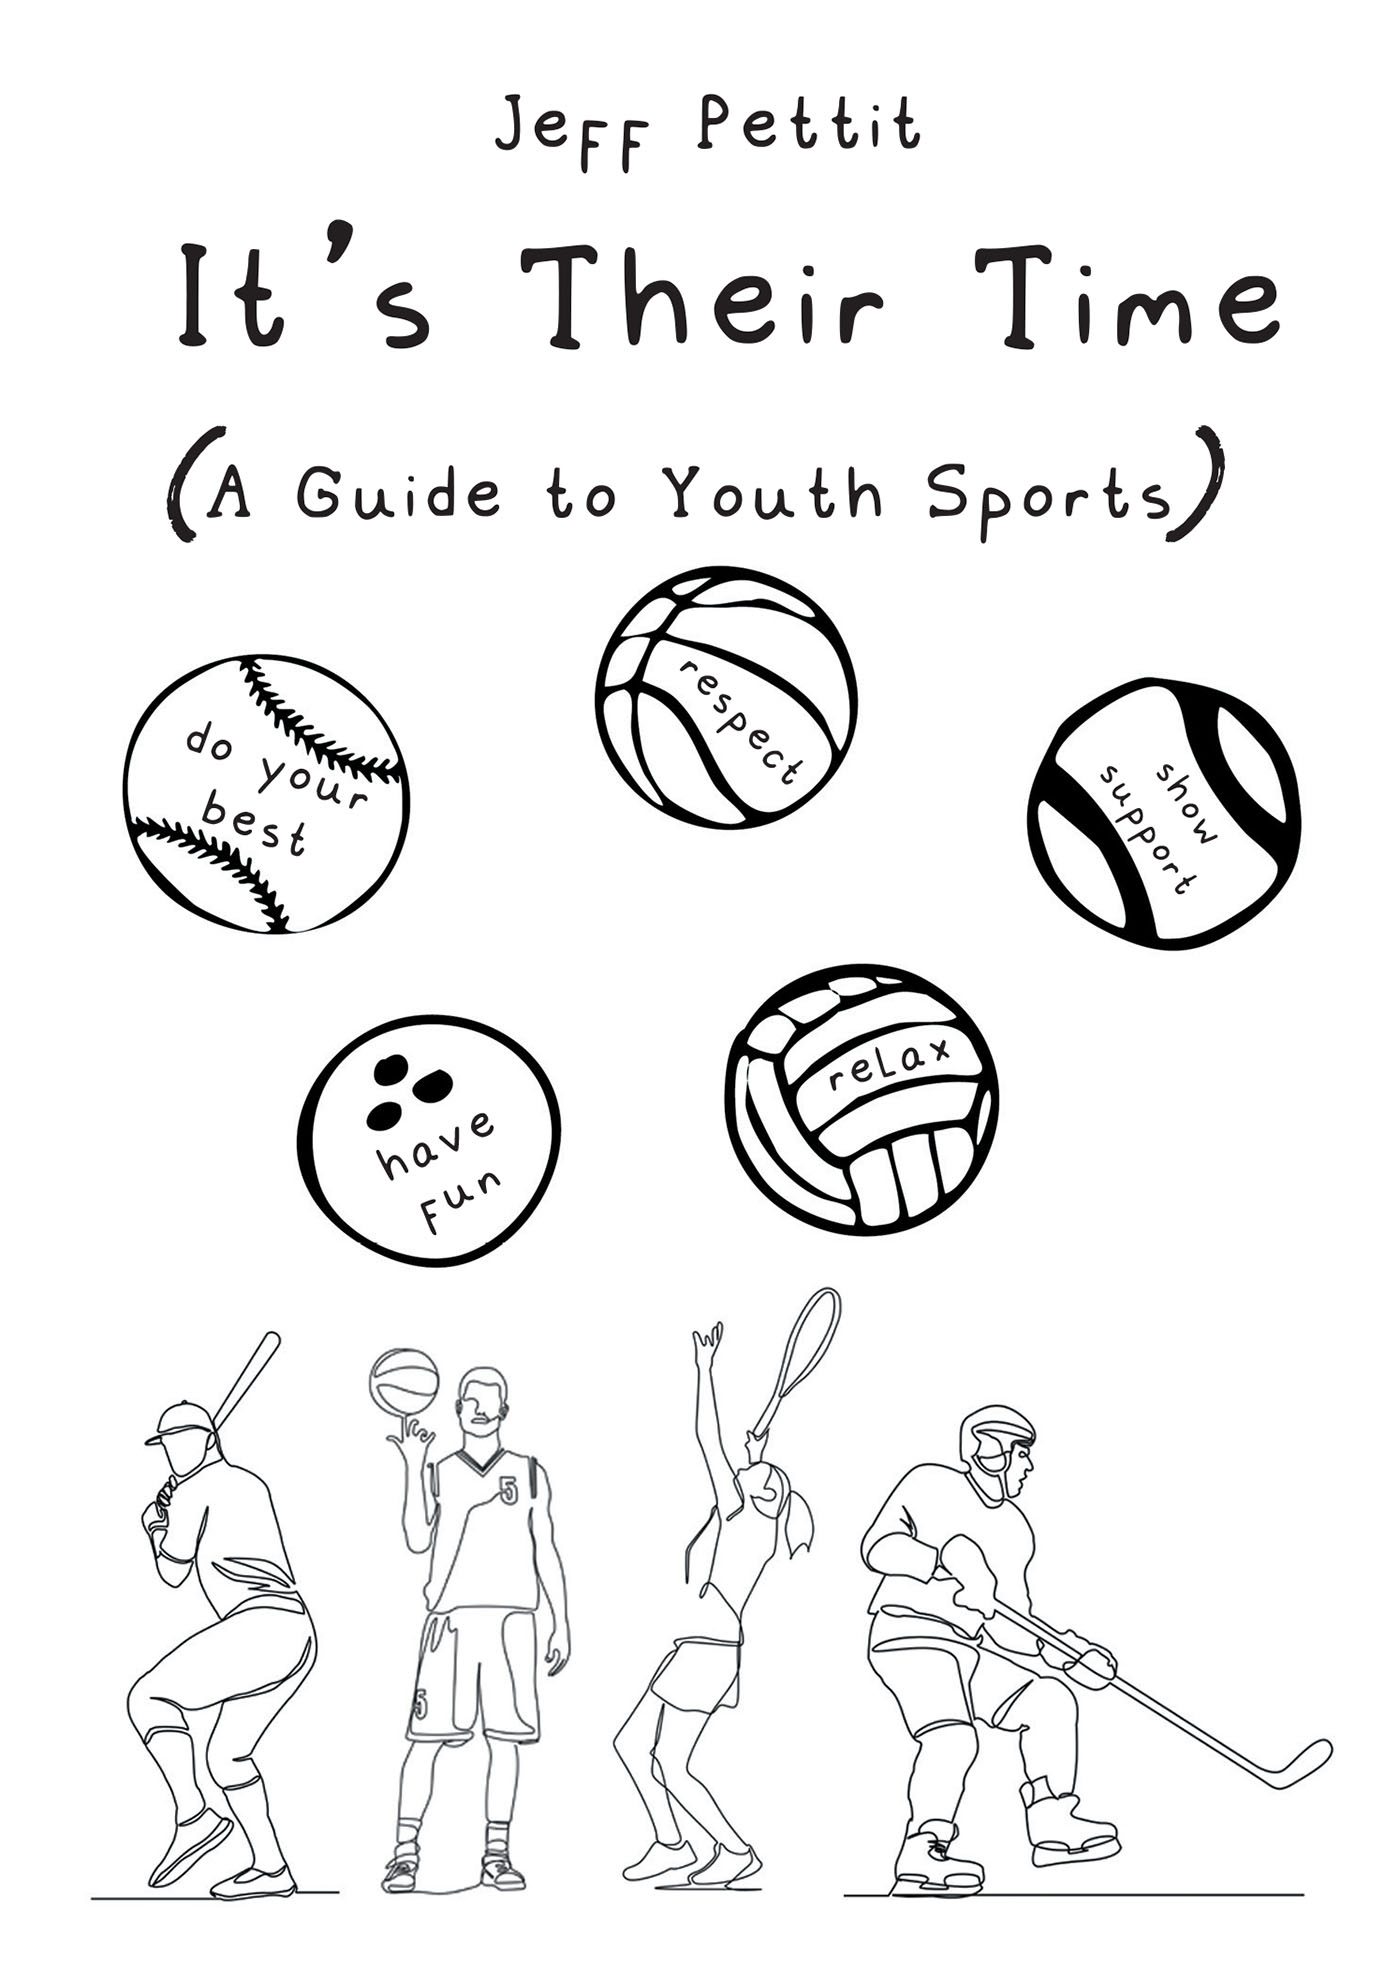 Author Jeff Pettit’s New Book, “It’s Their Time (A Guide to Youth Sports),” is from the Unique Point-of-View of a Coach, Trainer, and an Umpire